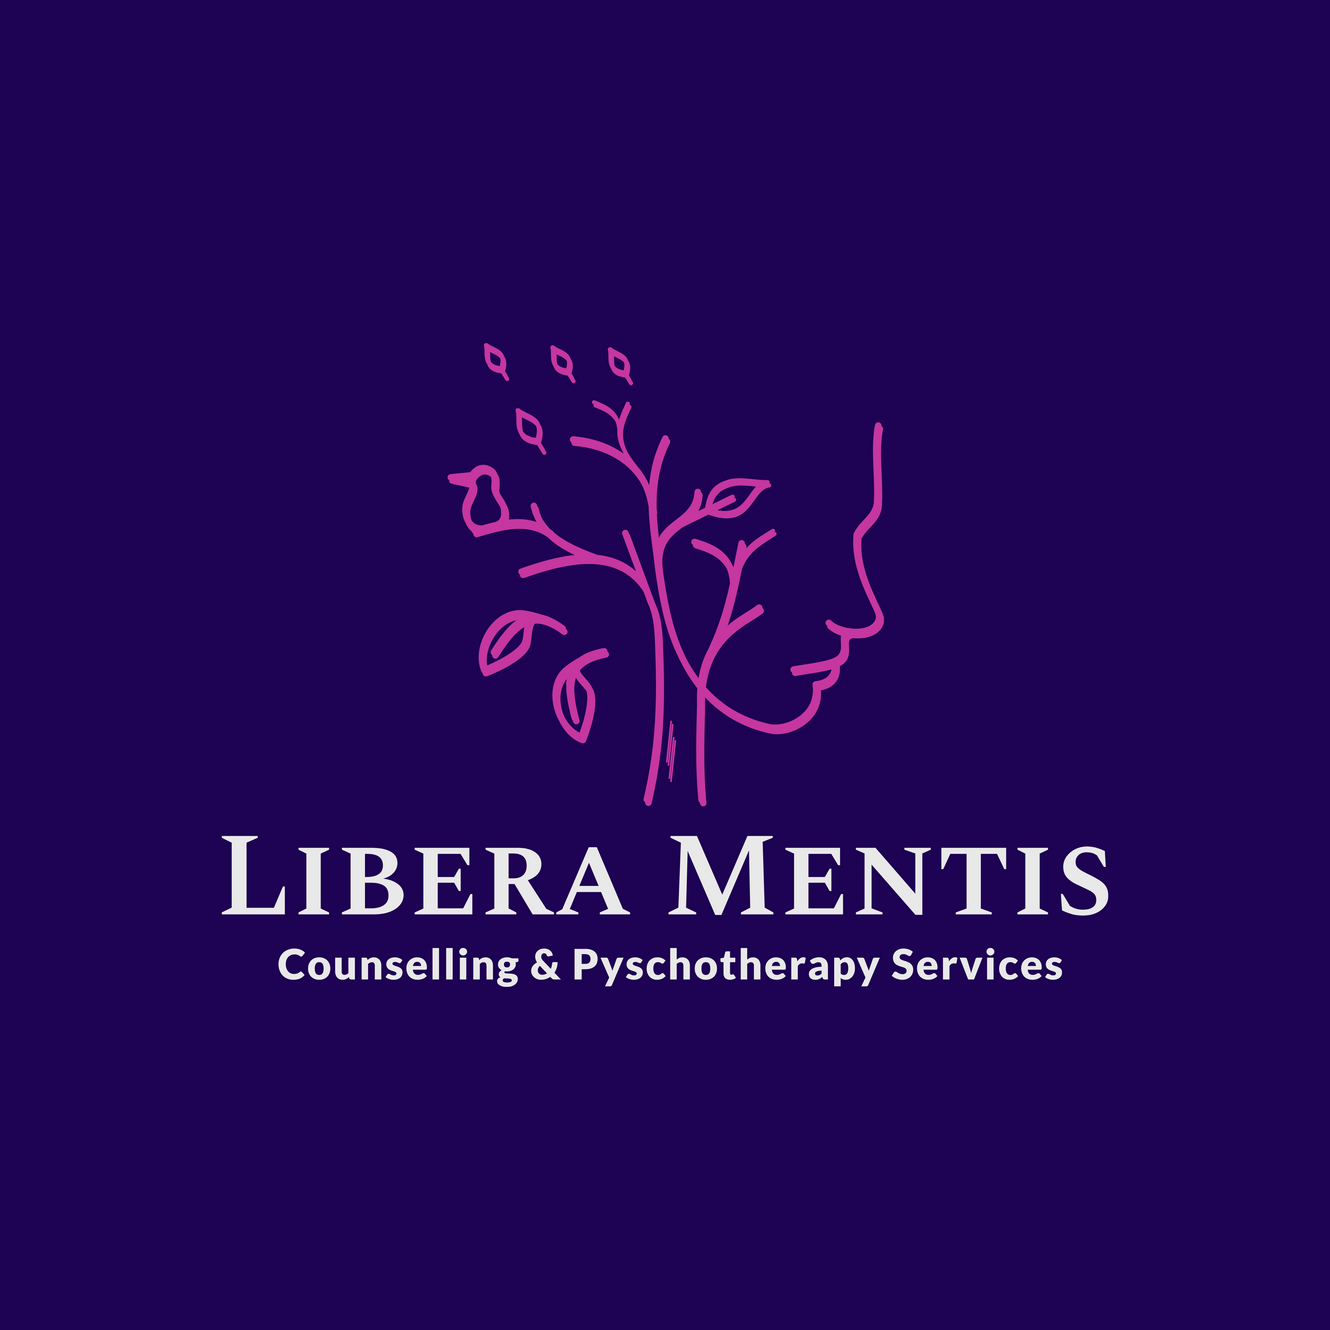 Grief Counselling Surrey | Libera mentis